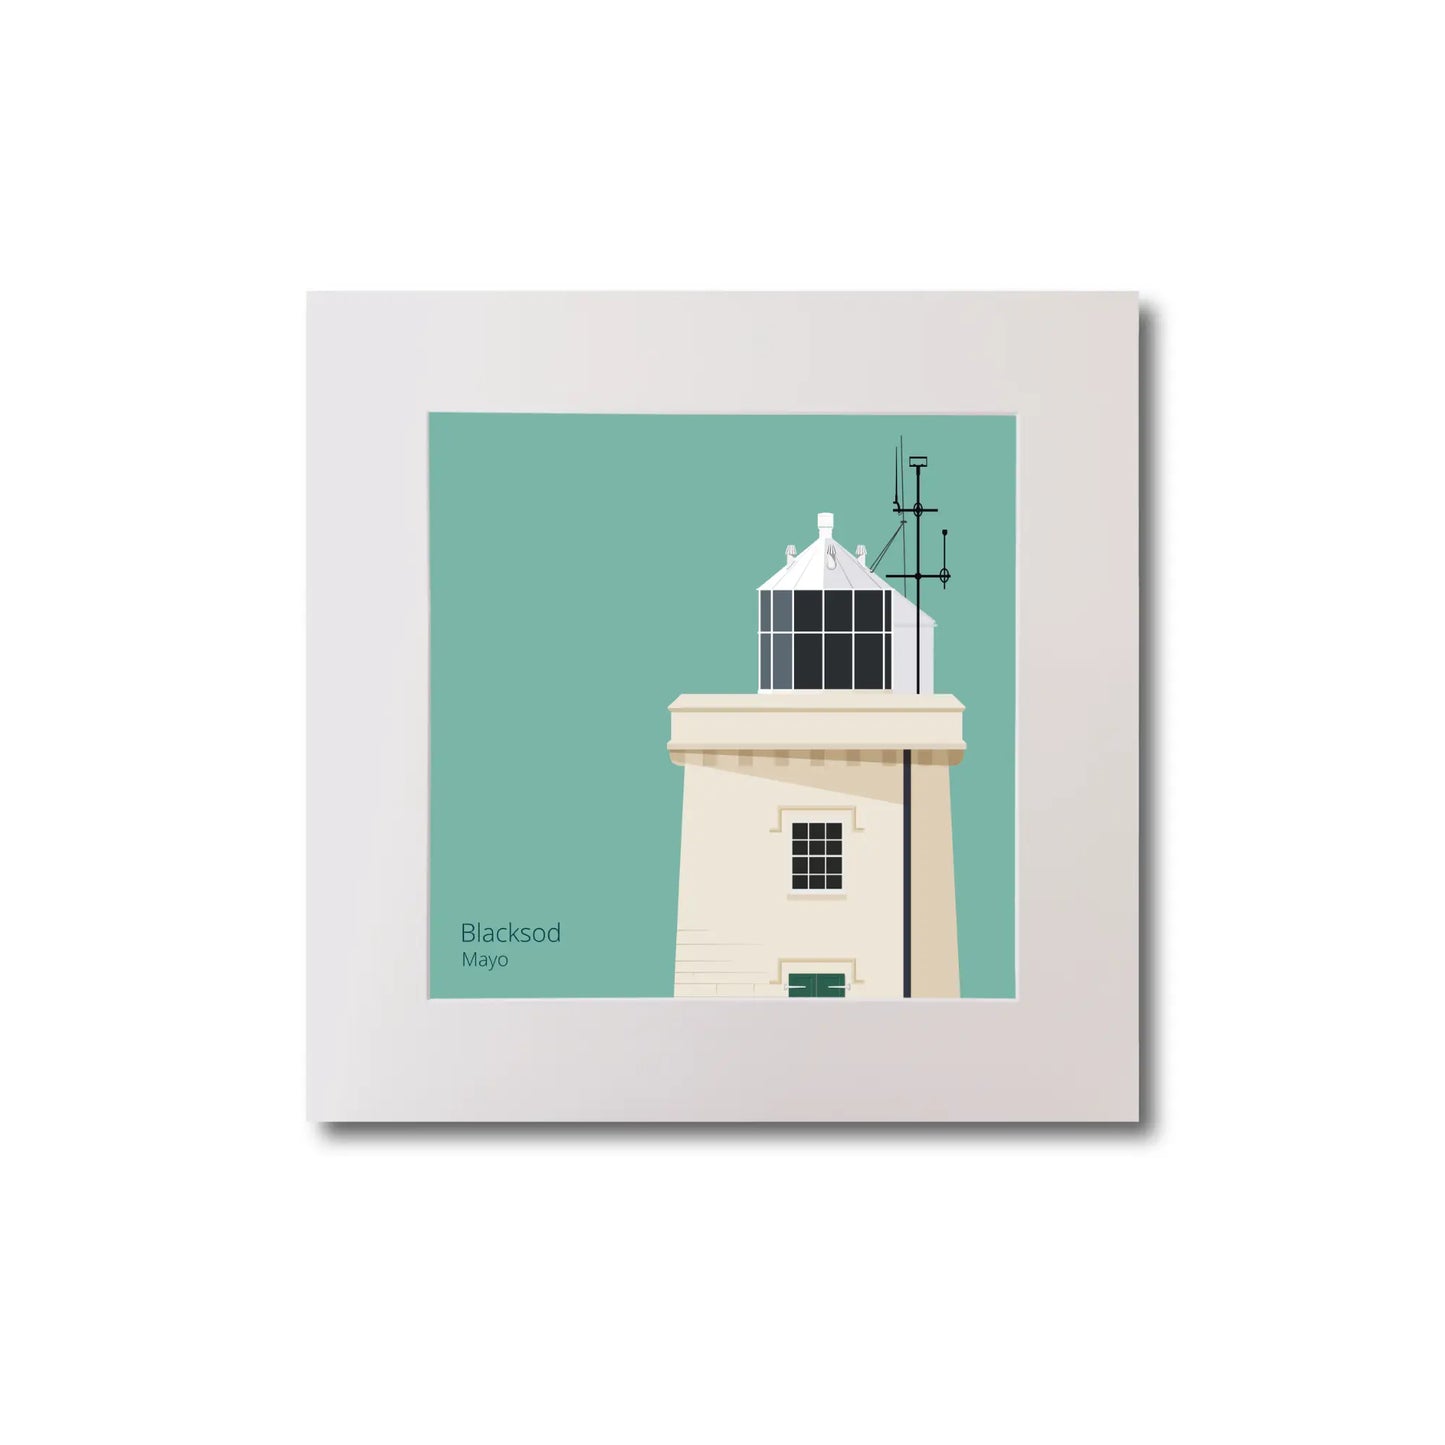 Illustration of Blacksod lighthouse on an ocean green background, mounted and measuring 20x20cm.